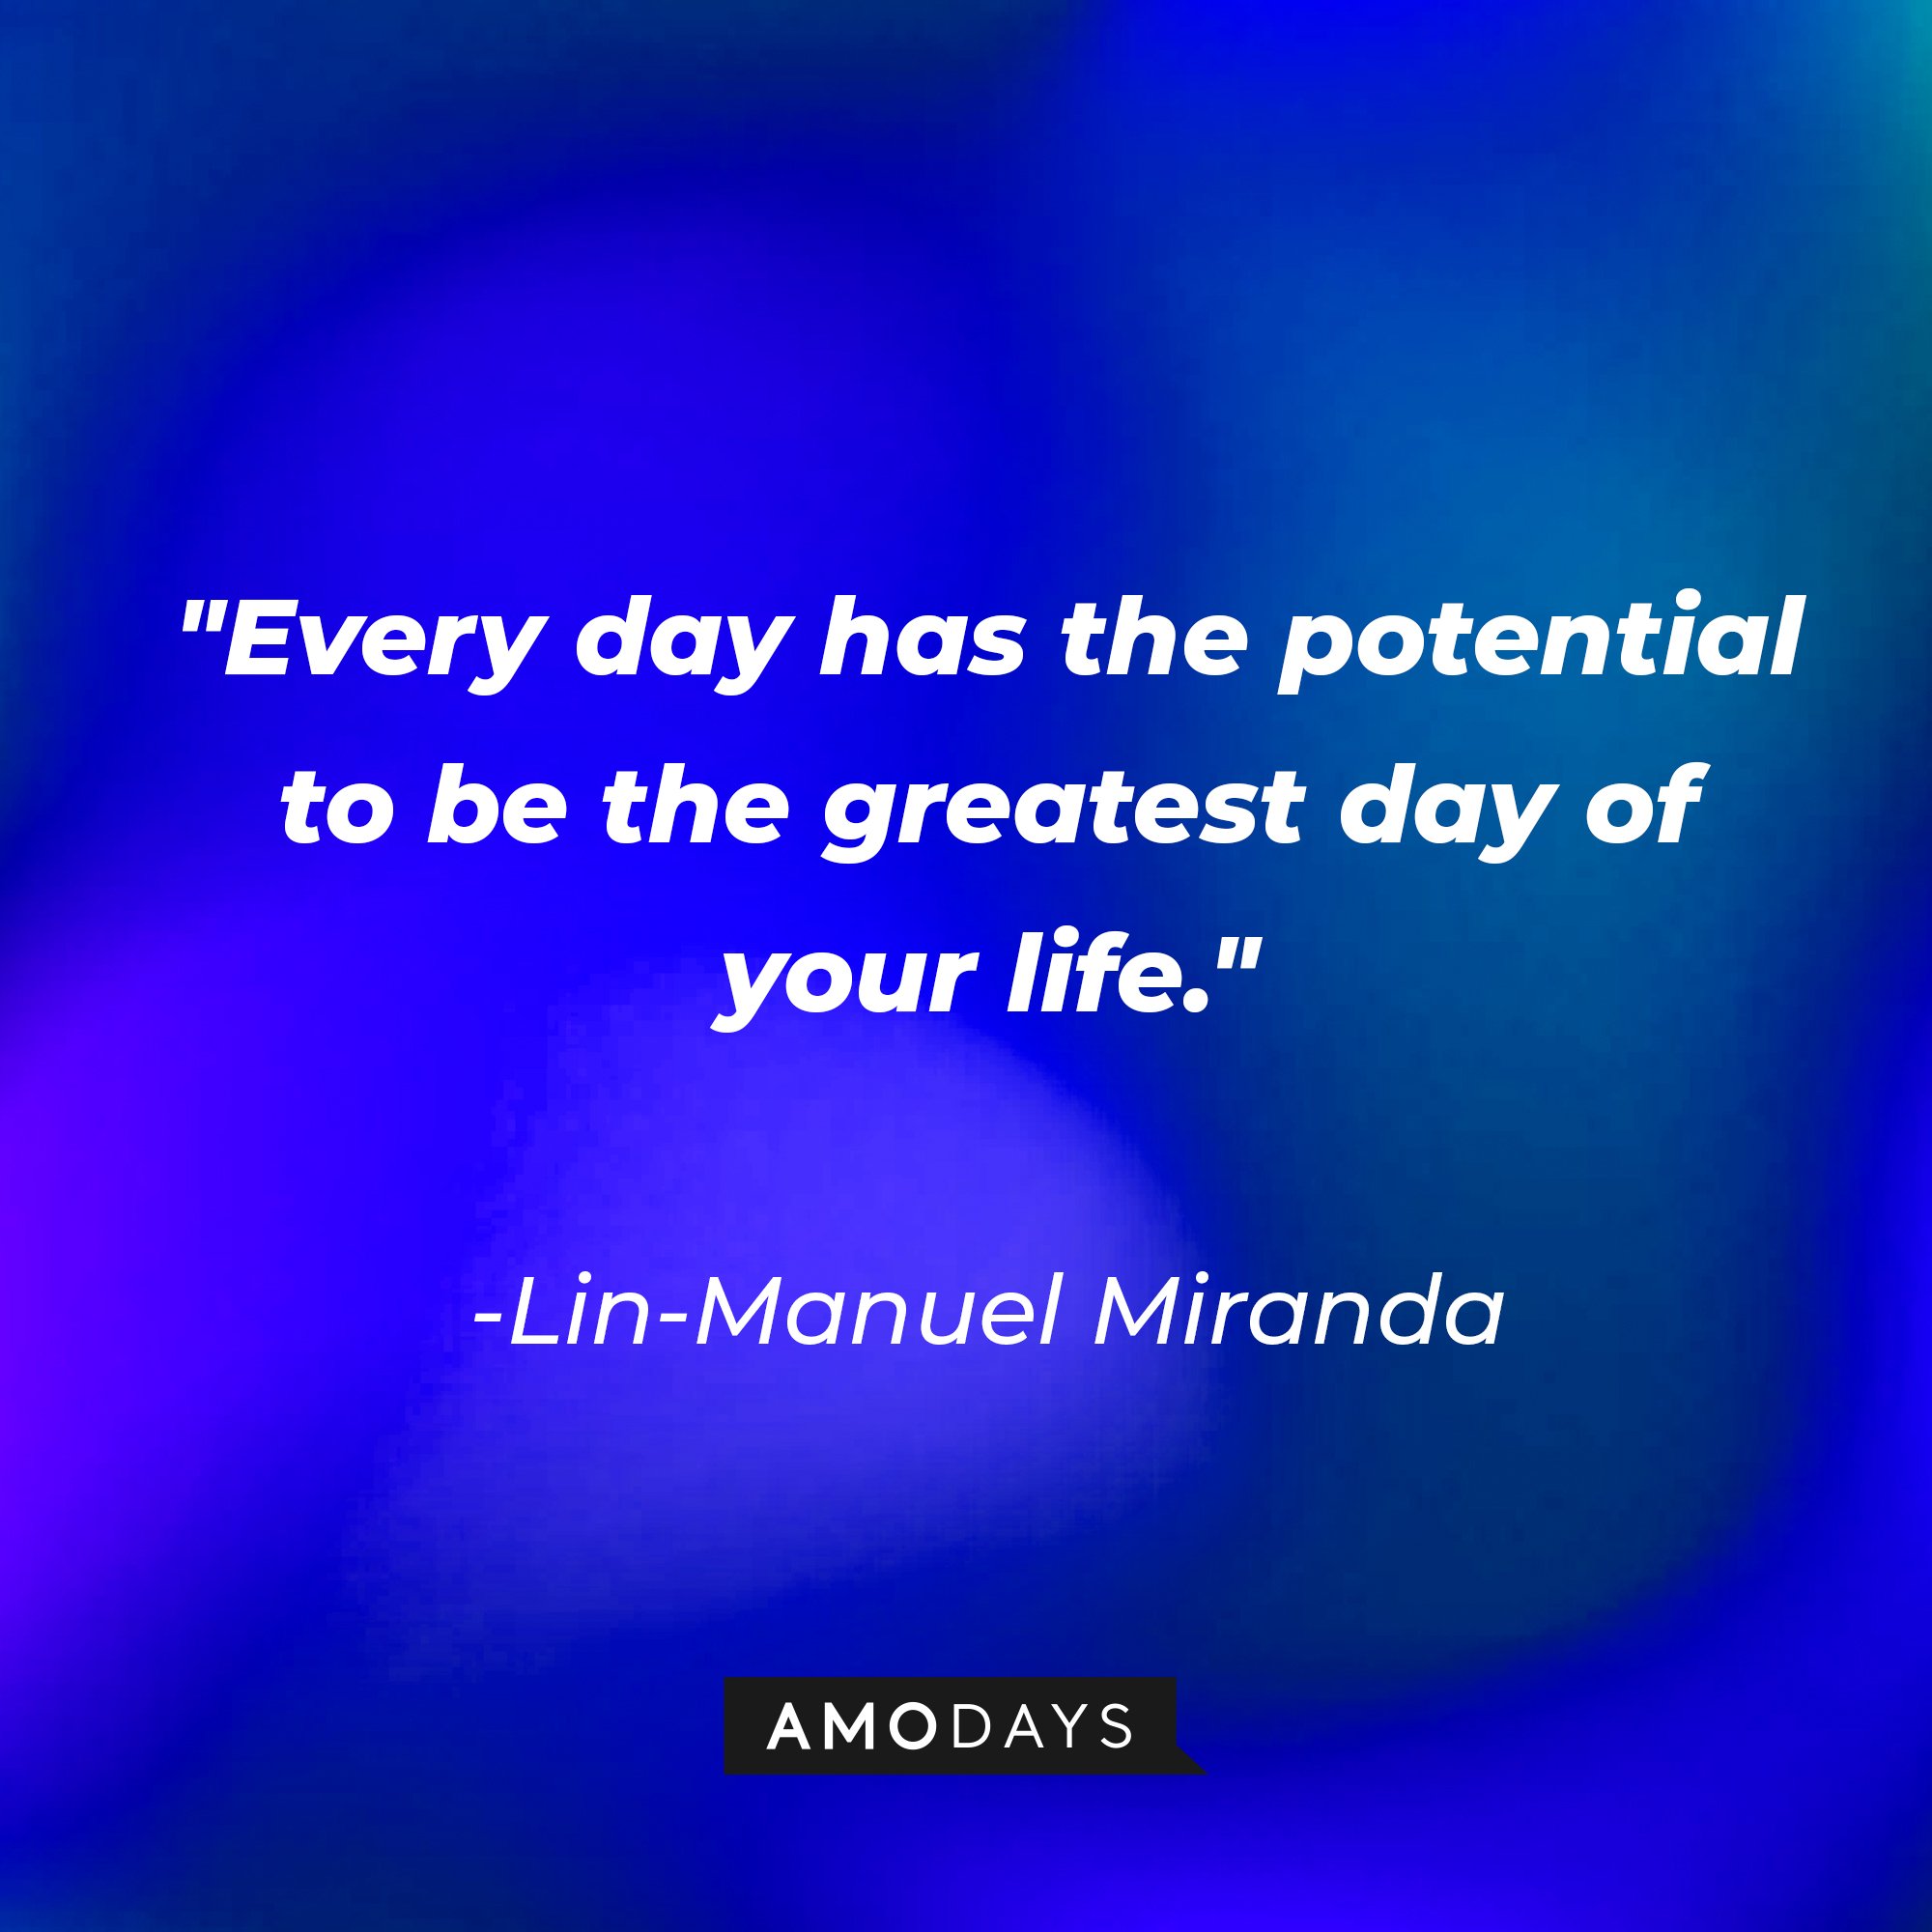 Lin-Manuel Miranda's quote: "Every day has the potential to be the greatest day of your life." | Image: AmoDays